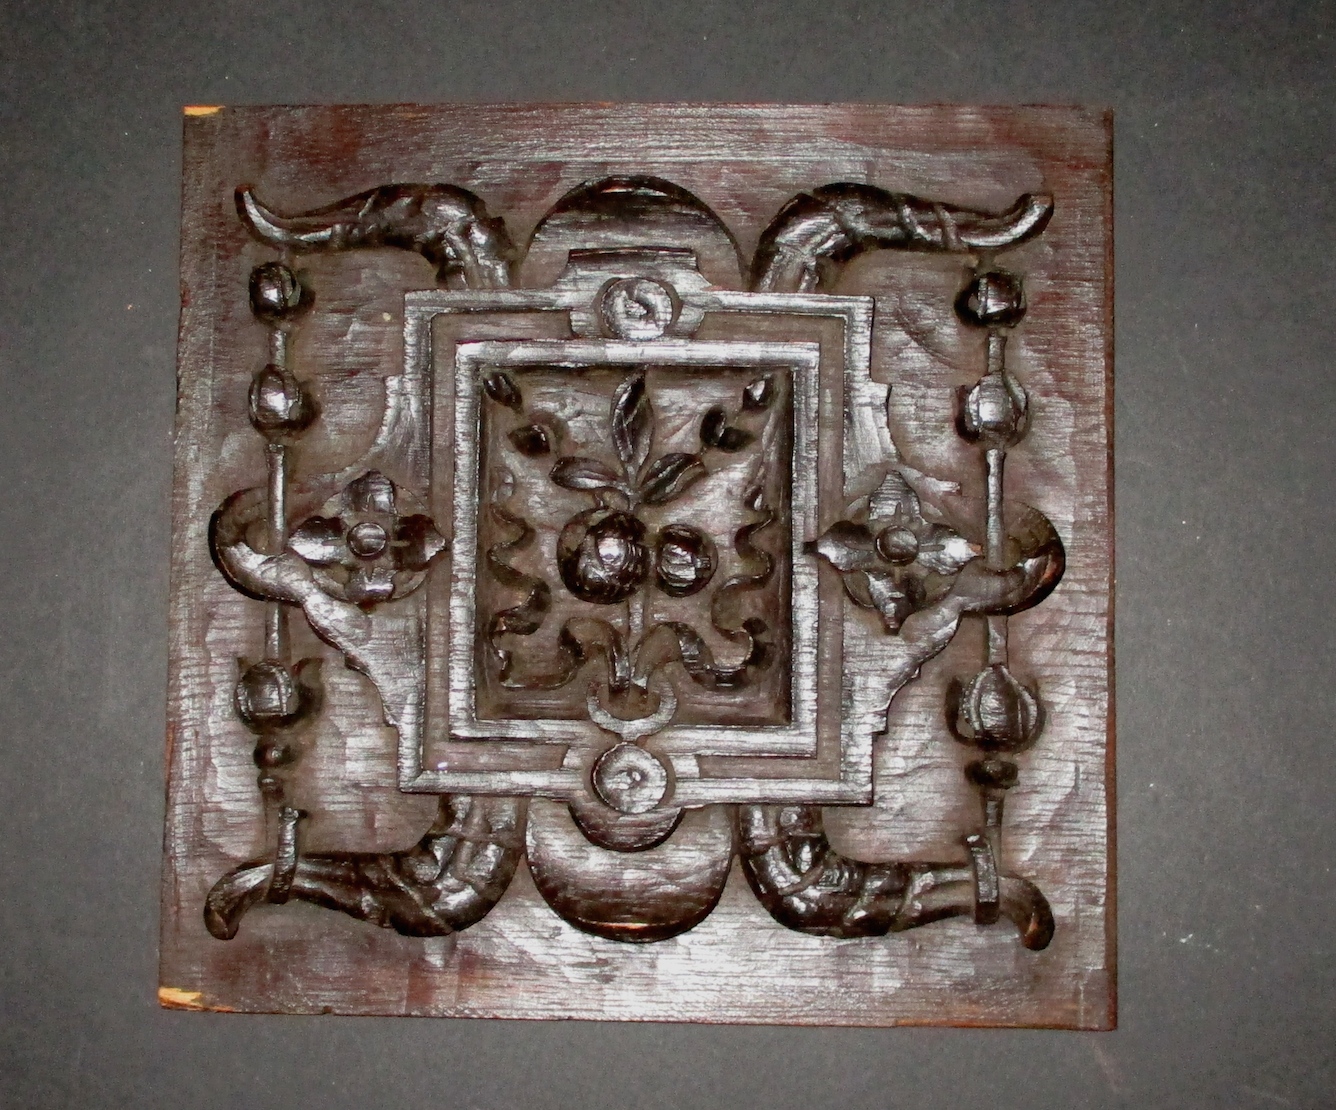 19th Century European Hand-carved Wooden Cabinet Panel (10" x 10")